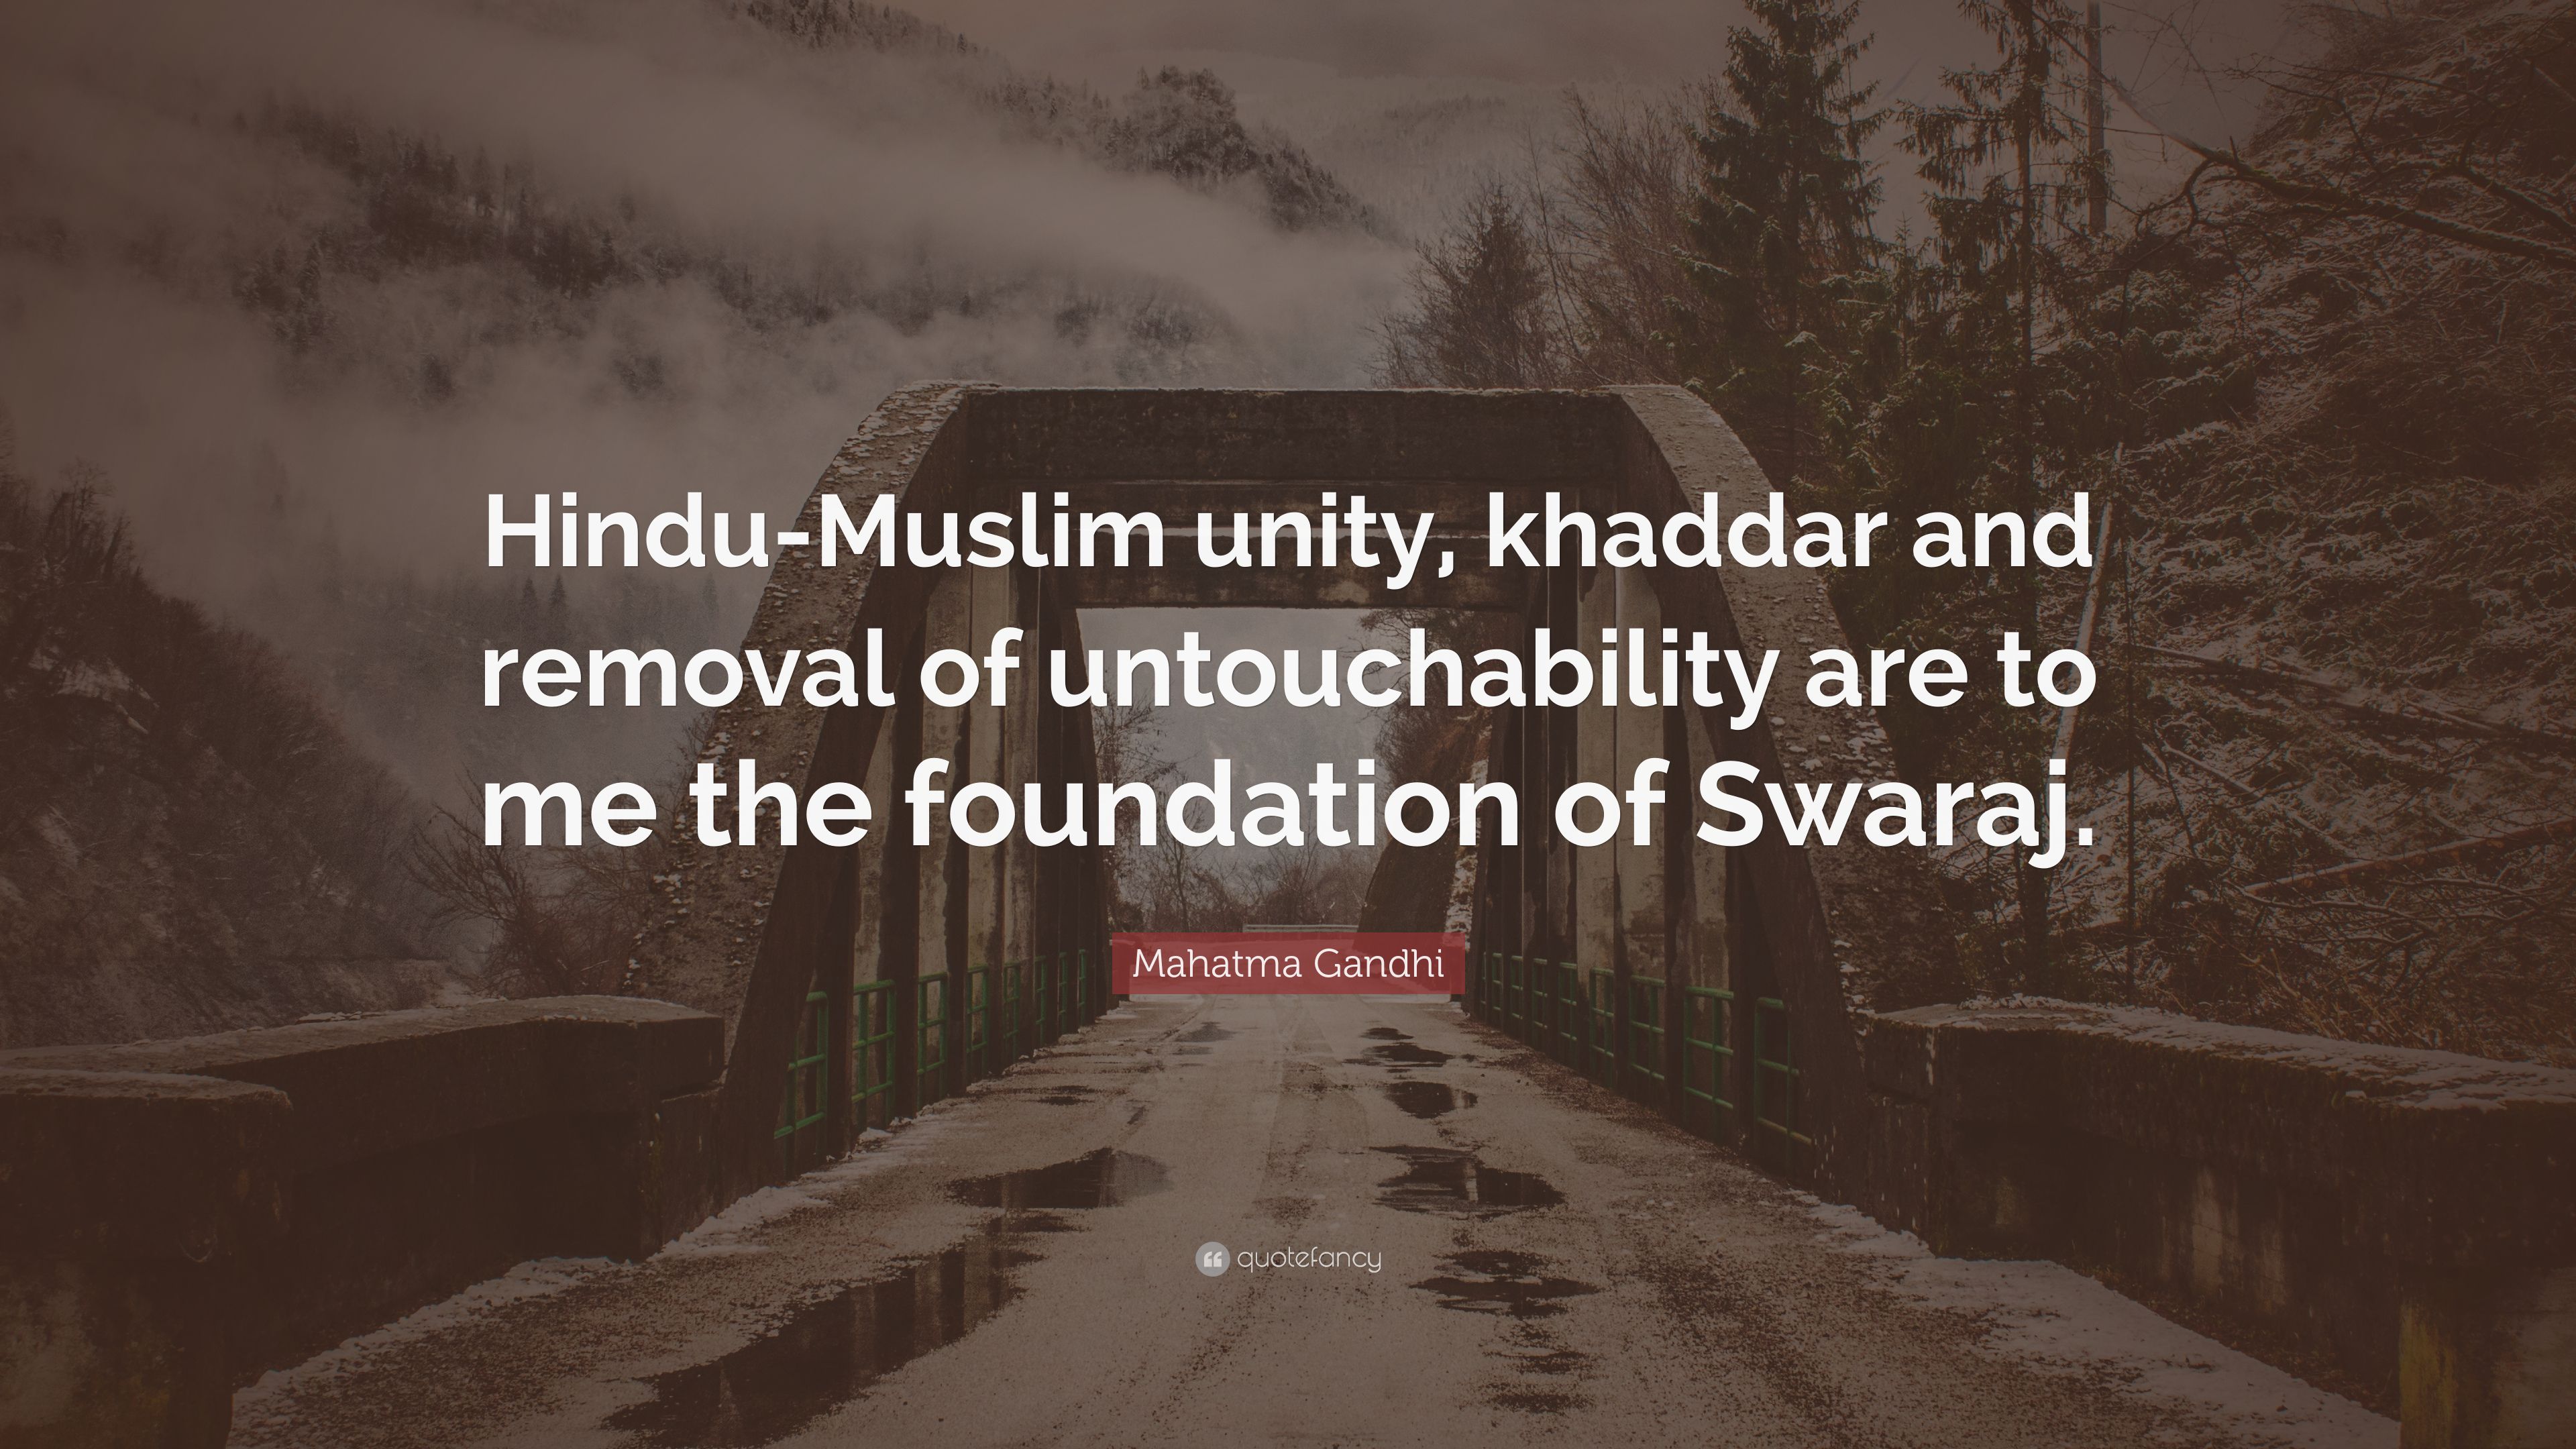 Mahatma Gandhi Quote: “Hindu Muslim Unity, Khaddar And Removal Of Untouchability Are To Me The Foundation